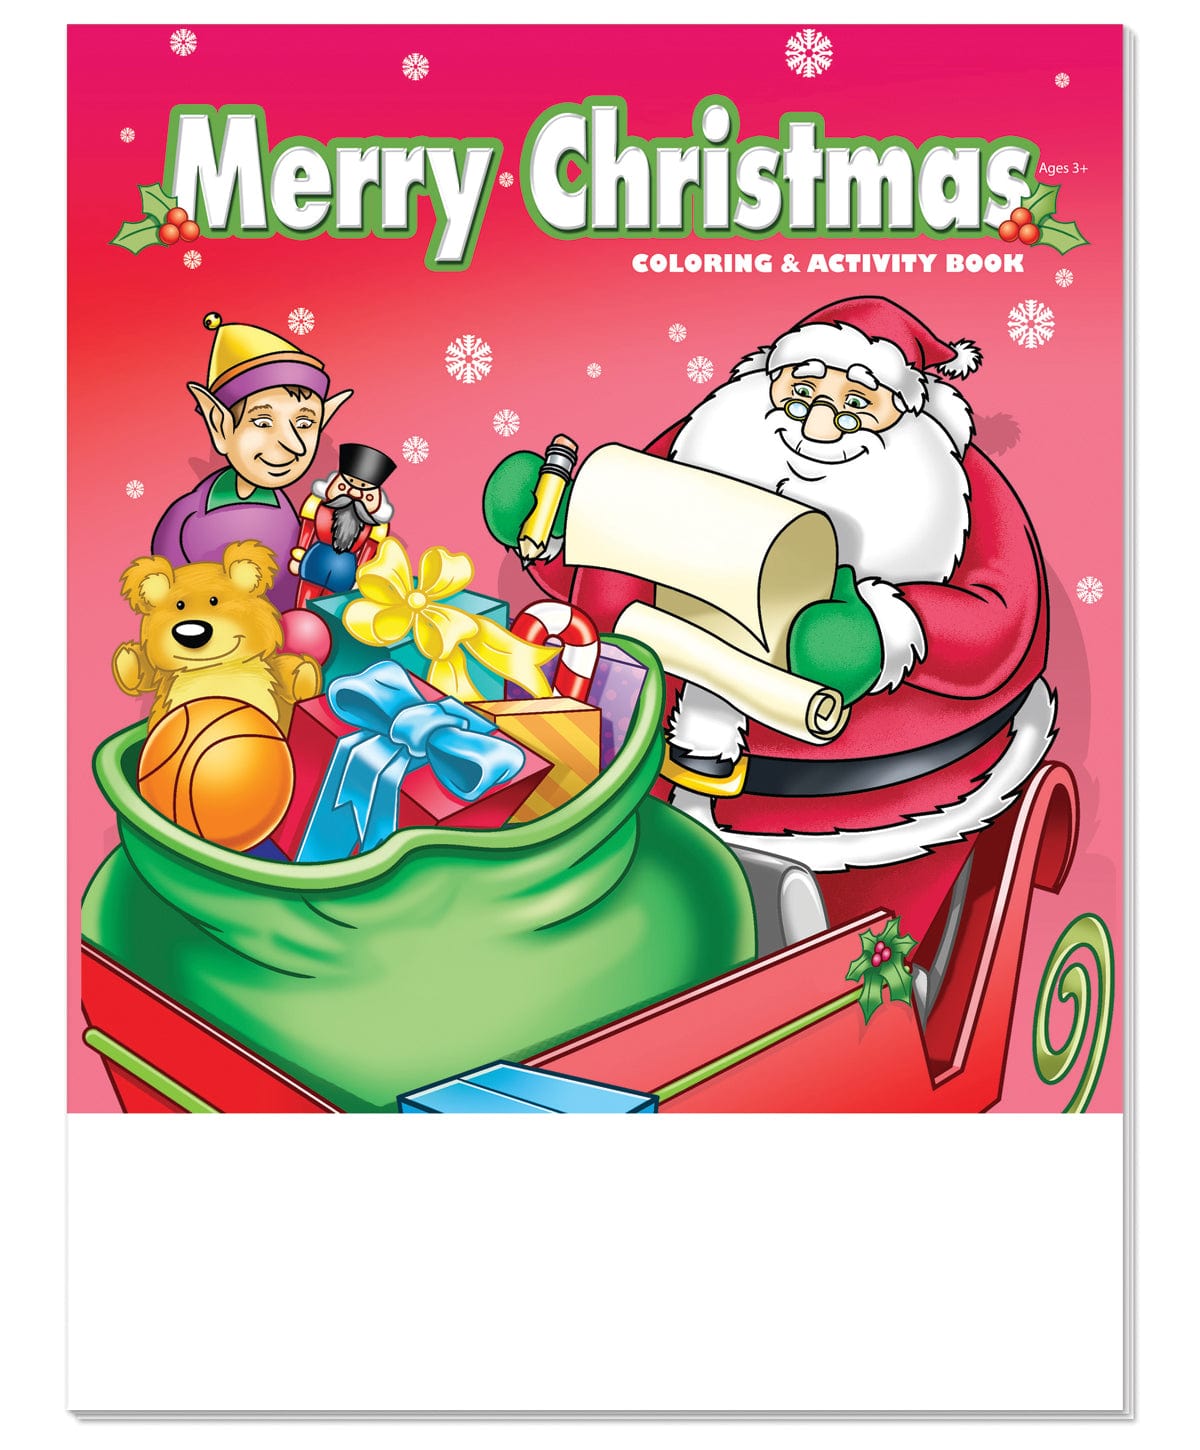 christmas activity pack: Christmas Coloring Books Bulk Assortment for Kids  Toddlers 112 pages size 6*9 (Paperback)